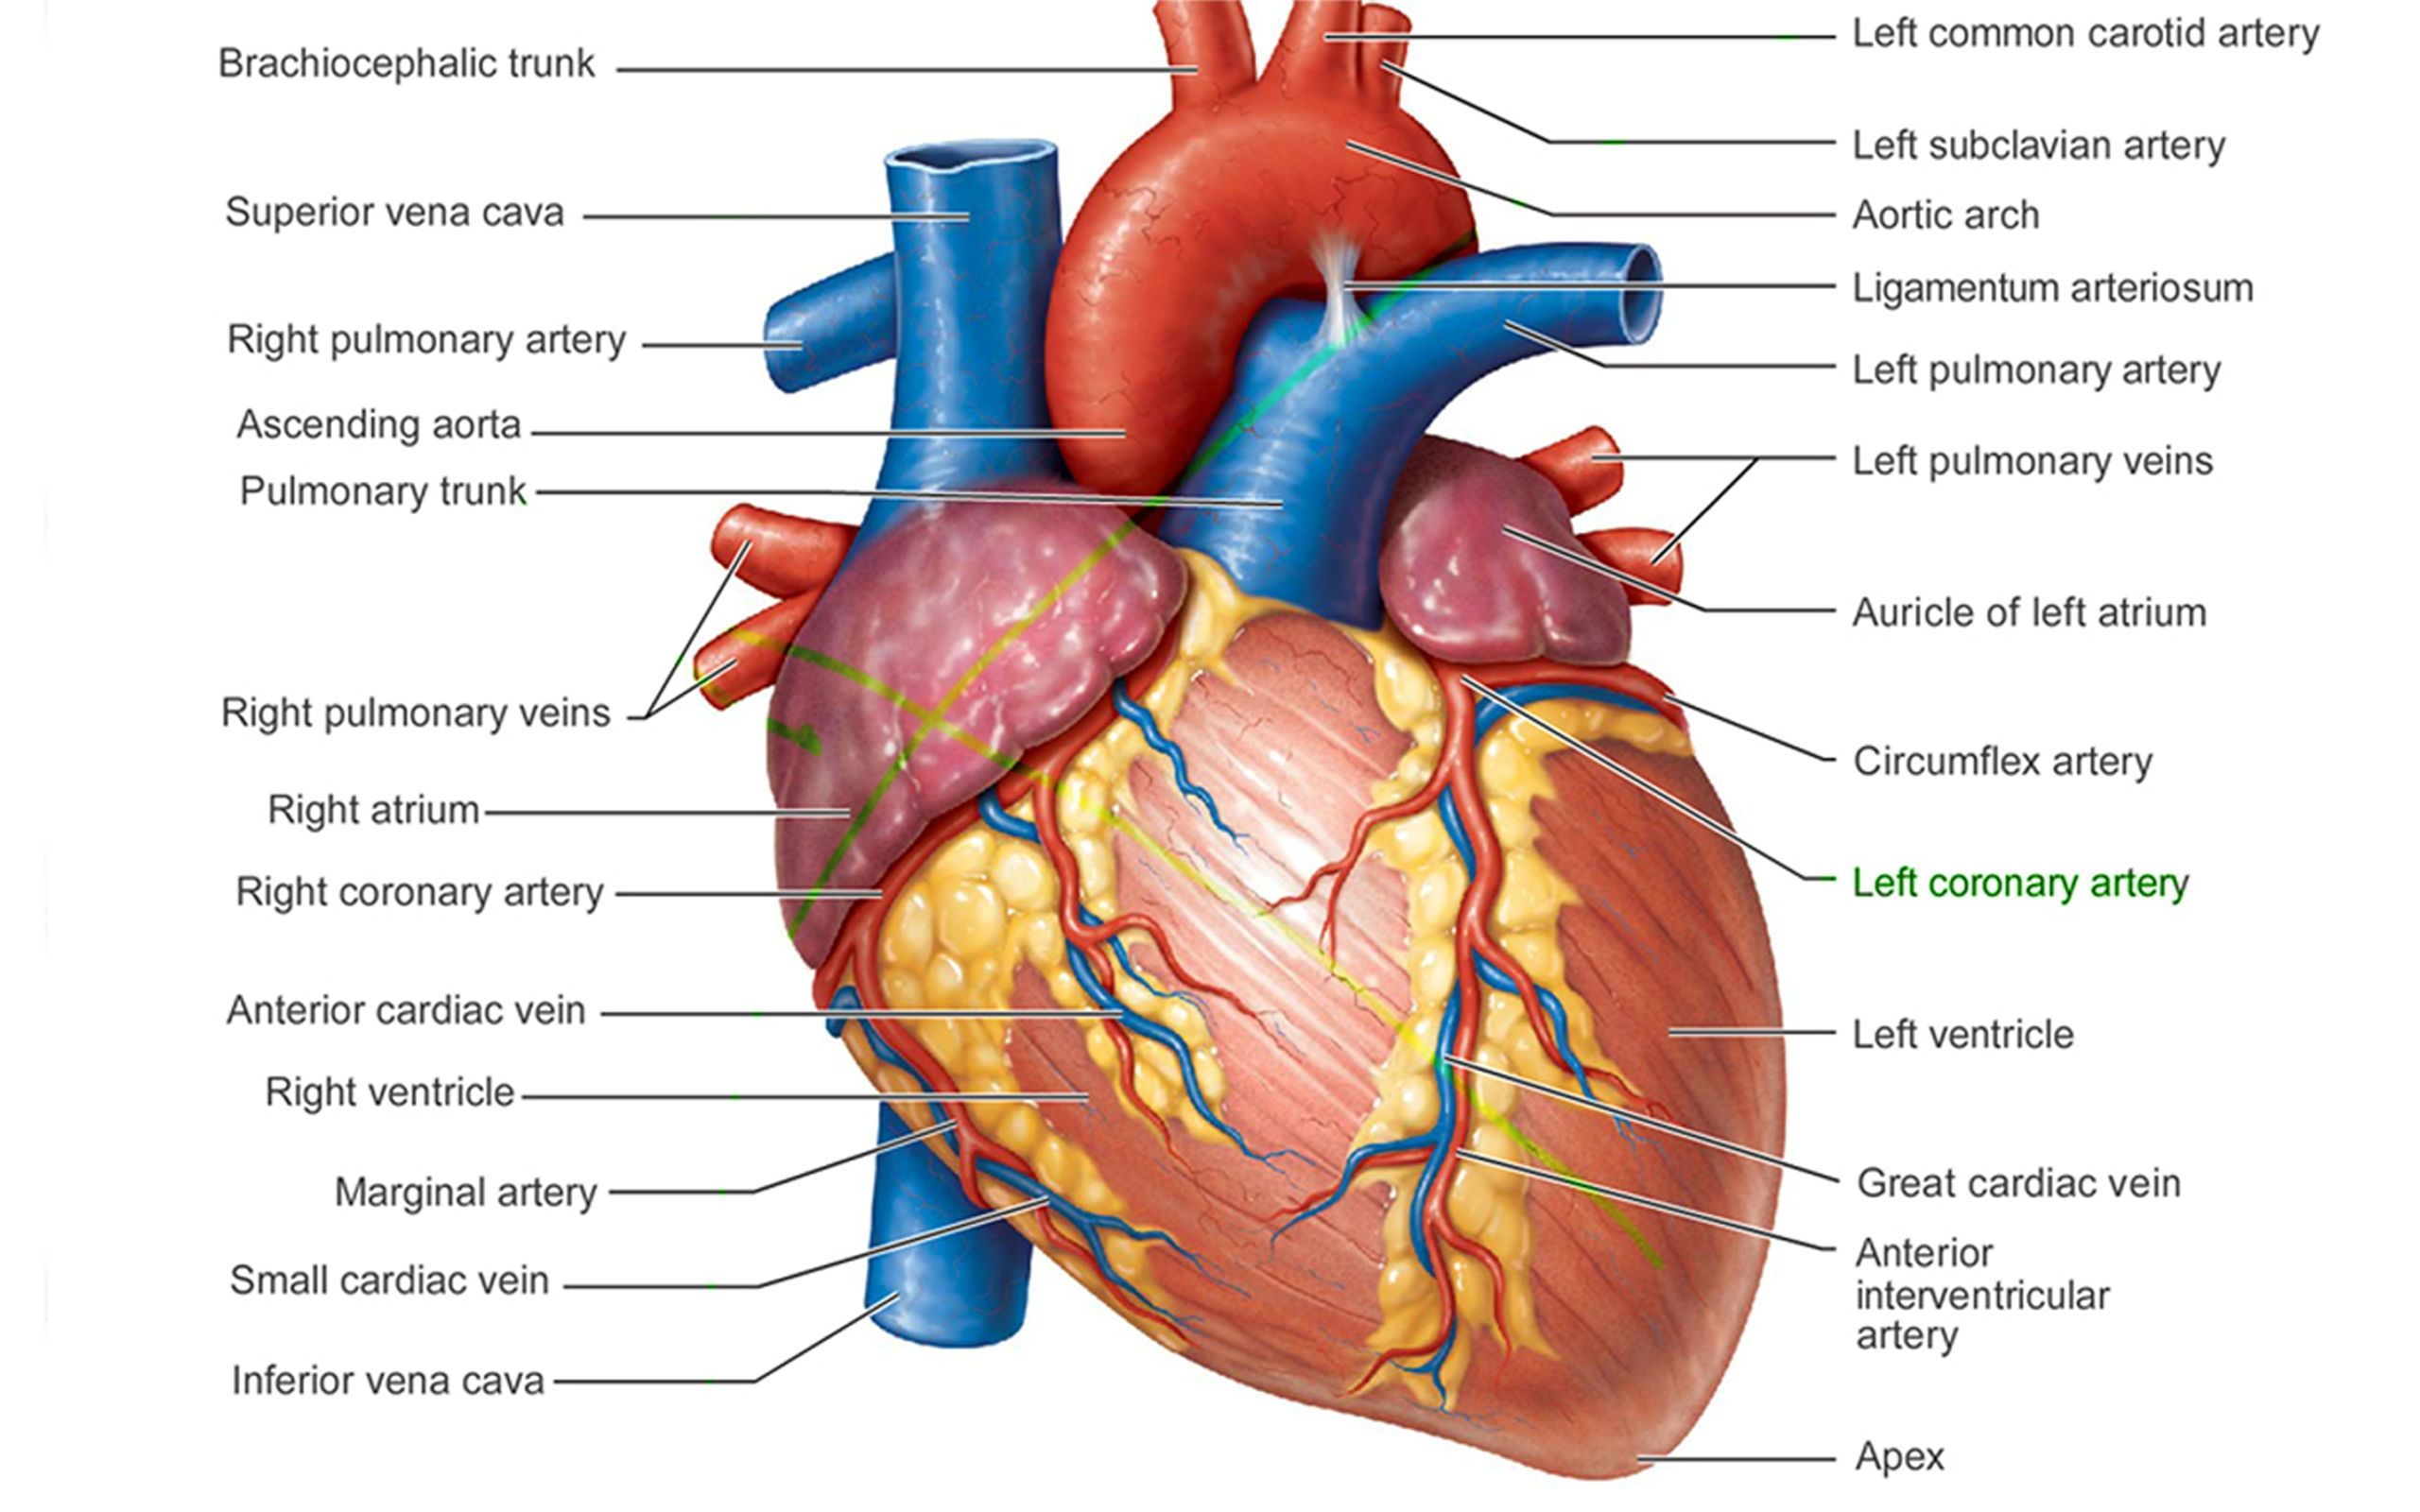 Picture Of Human Heart Anatomy Anatomy Of The Human Heart 4k Ultra HD Wallpaper. Human heart anatomy, Heart anatomy, Human anatomy and physiology